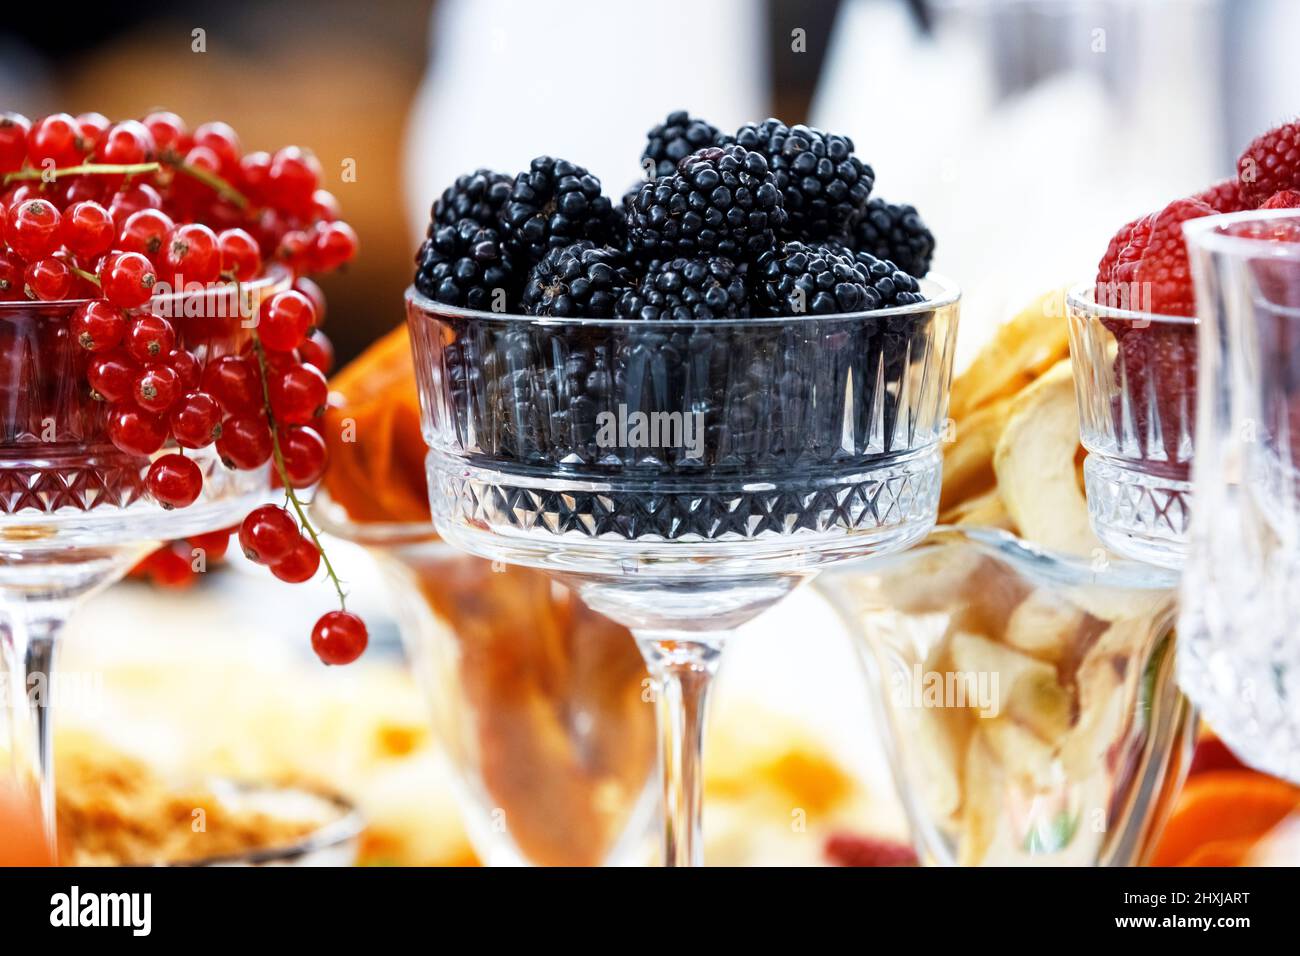 Several glasses filled with fresh berries of red currant, blackberry and raspberry. Berries of the summer garden. Stock Photo